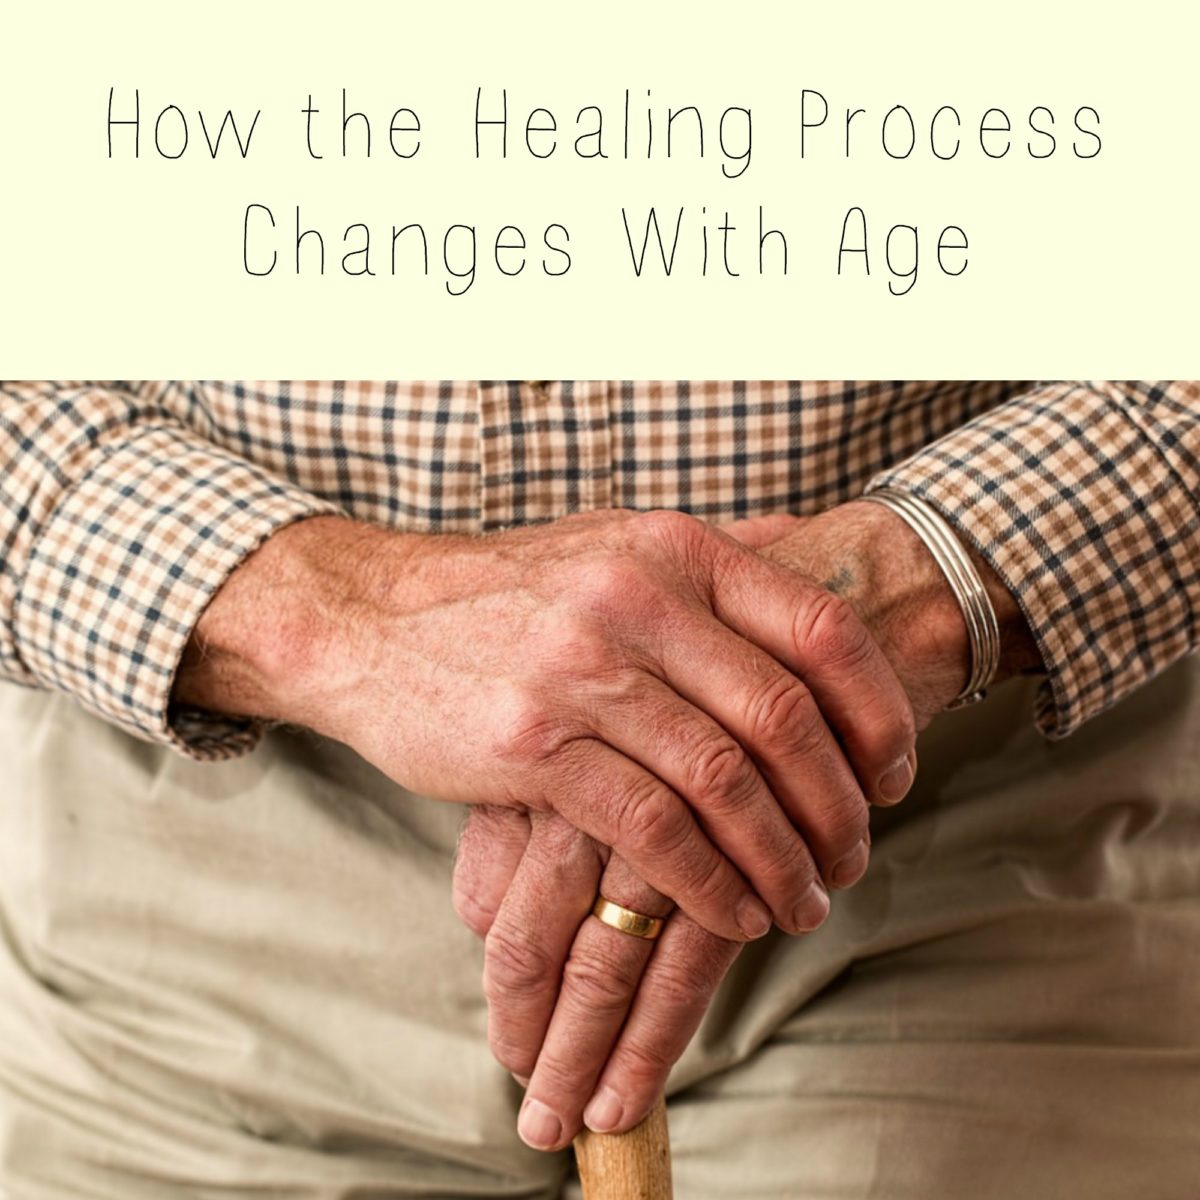 How the Healing Process Changes With Age